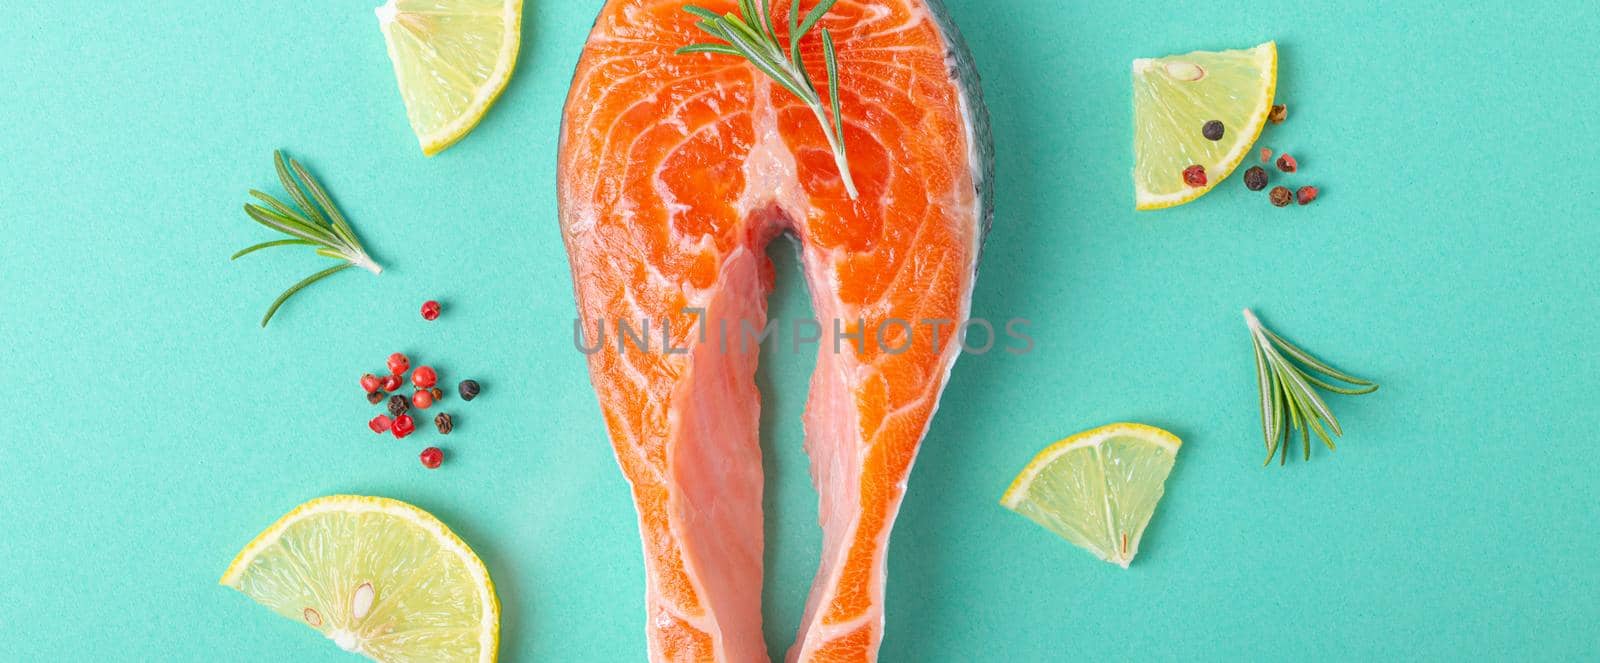 Raw fresh fish salmon steak top view on blue clean background from above by its_al_dente